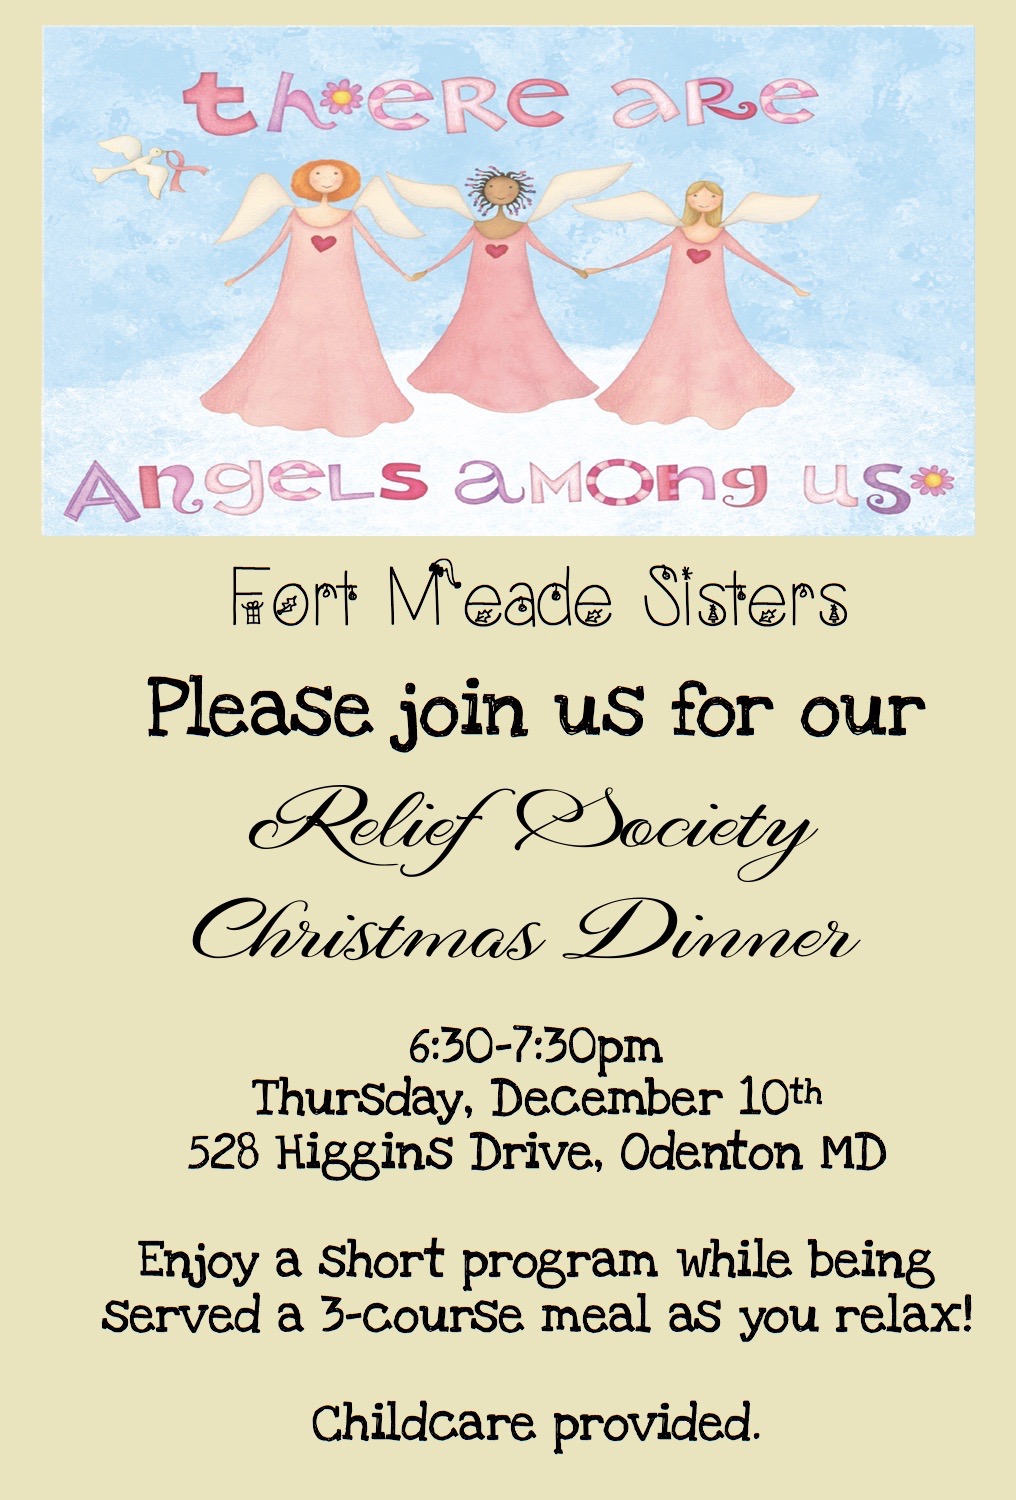 “Angels Among Us” Relief Society Christmas Dinner ...